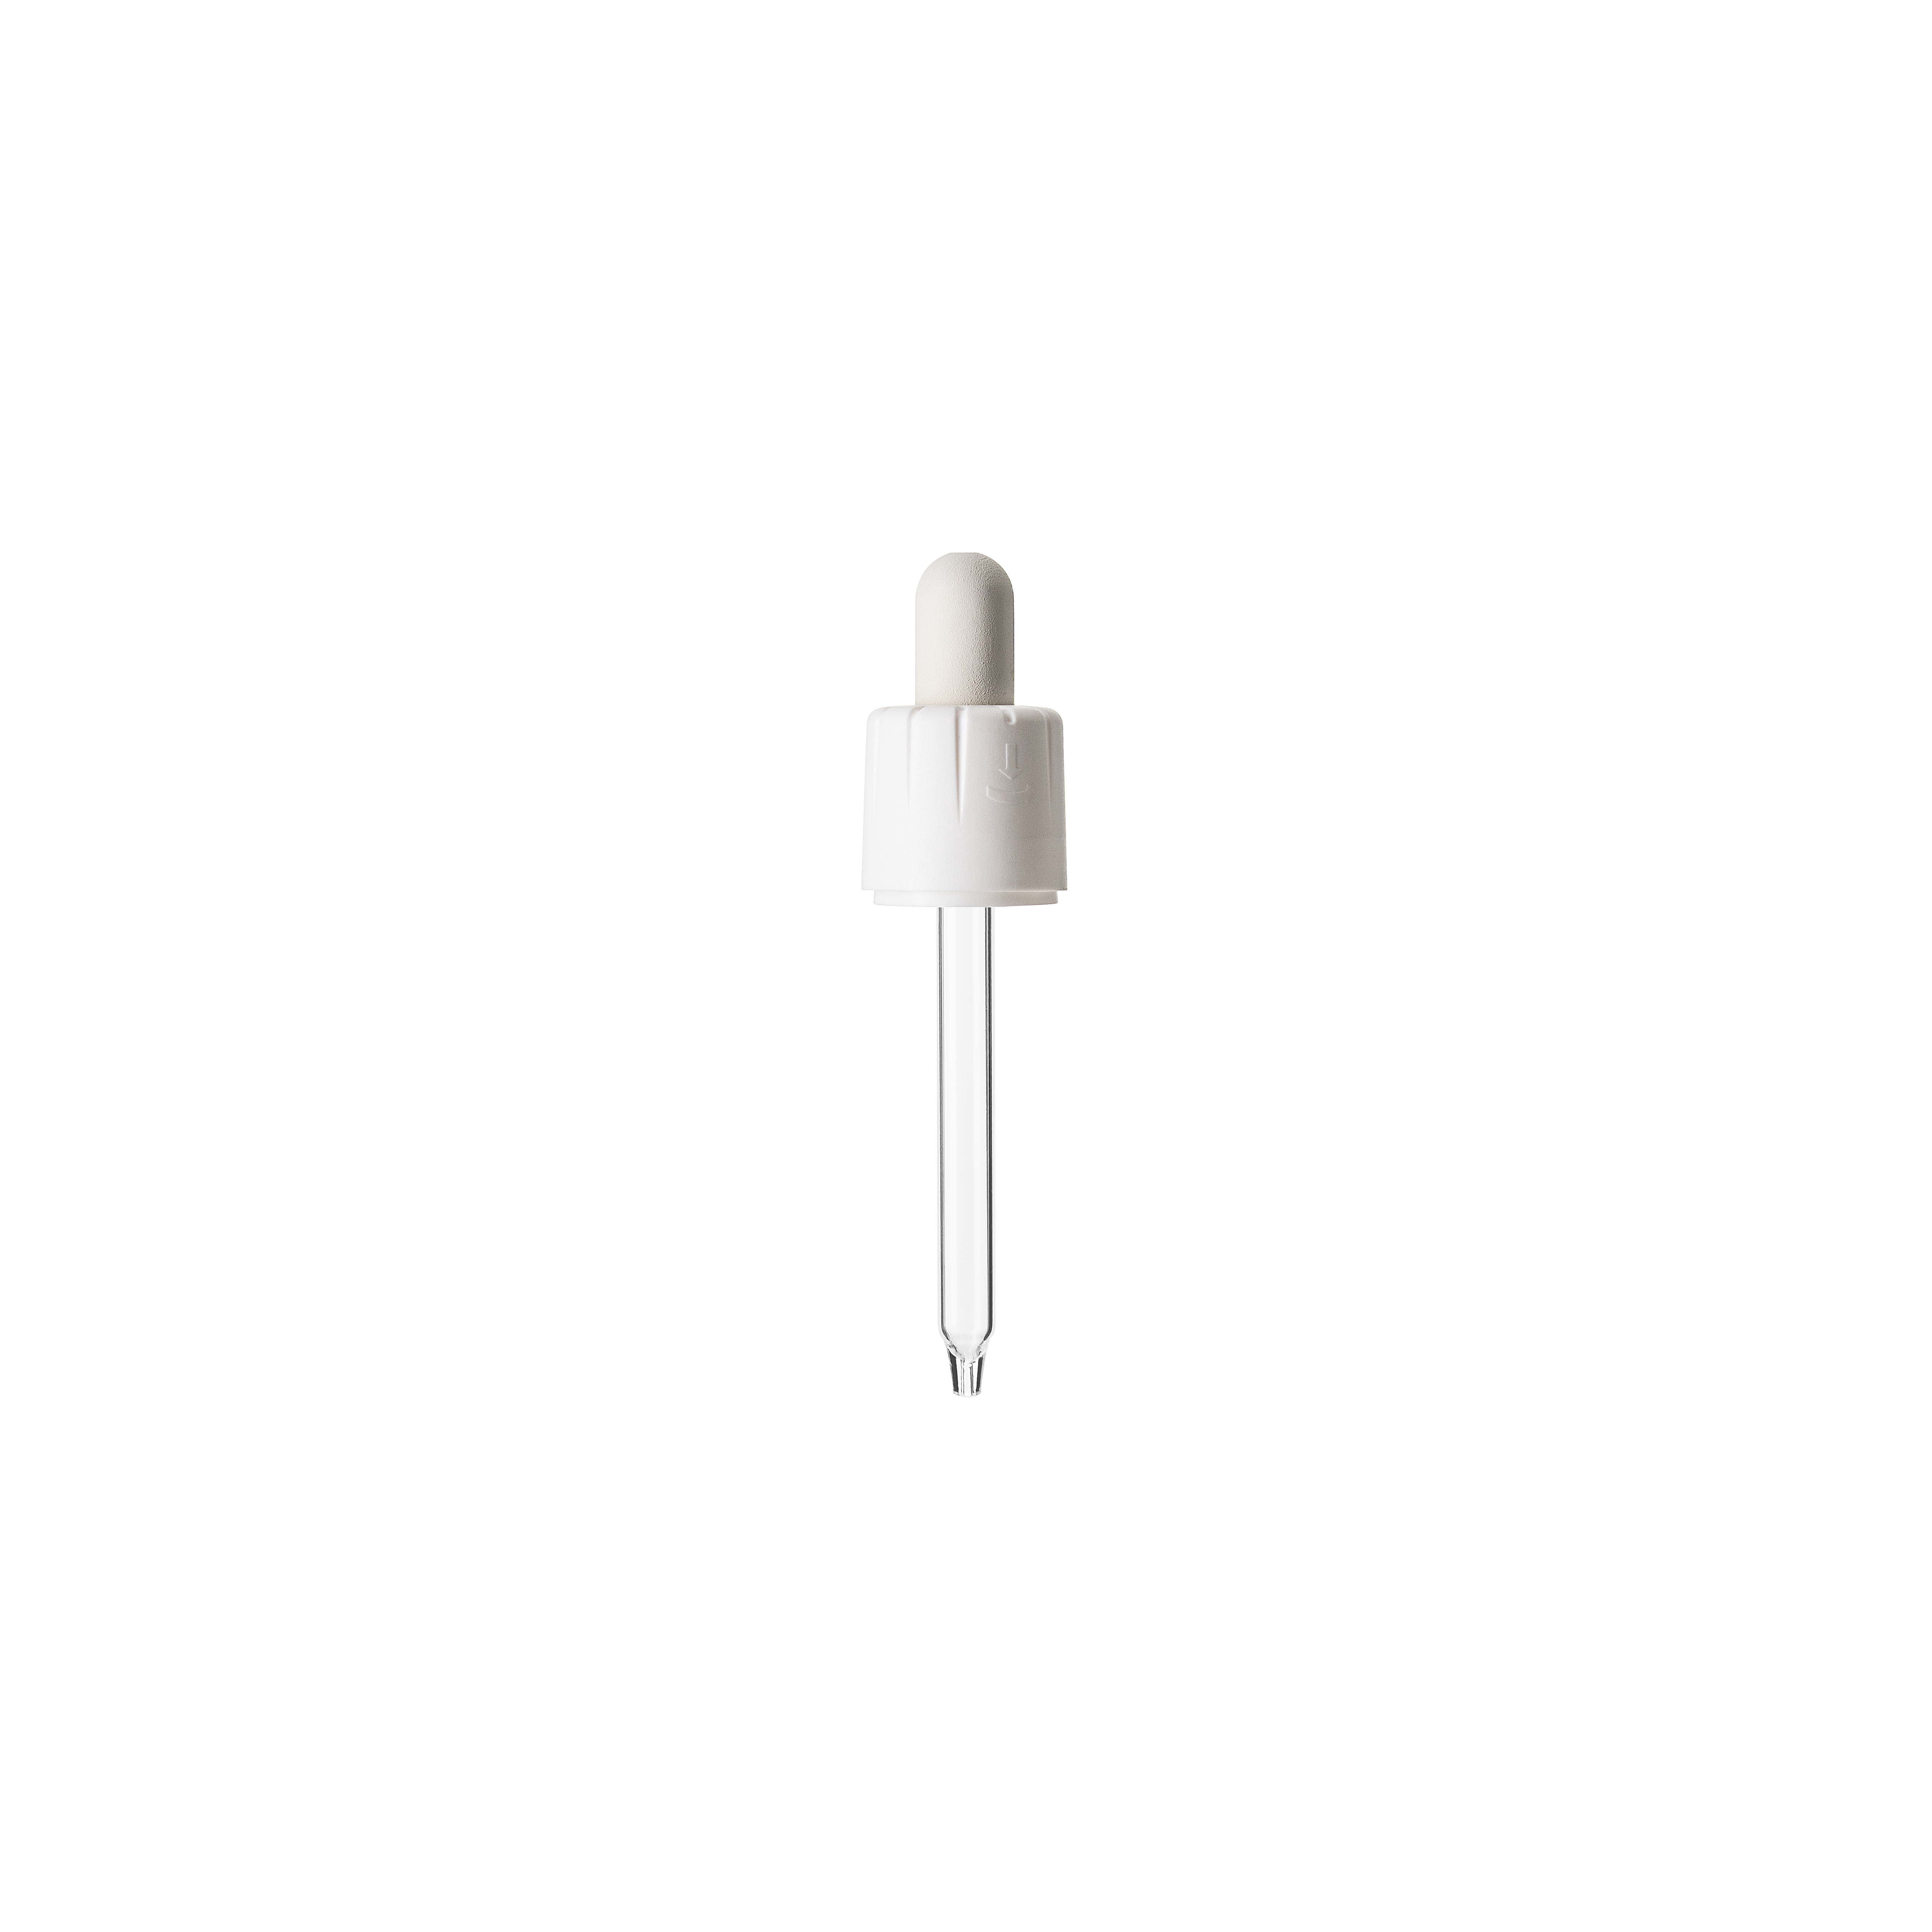 Child-resistant pipette series II, DIN18, tamper-evident, PP/PEHD, white, fine ribbed, white bulb NBR 1.0 ml, conical tip with 1.0 opening for Ginger 30 ml